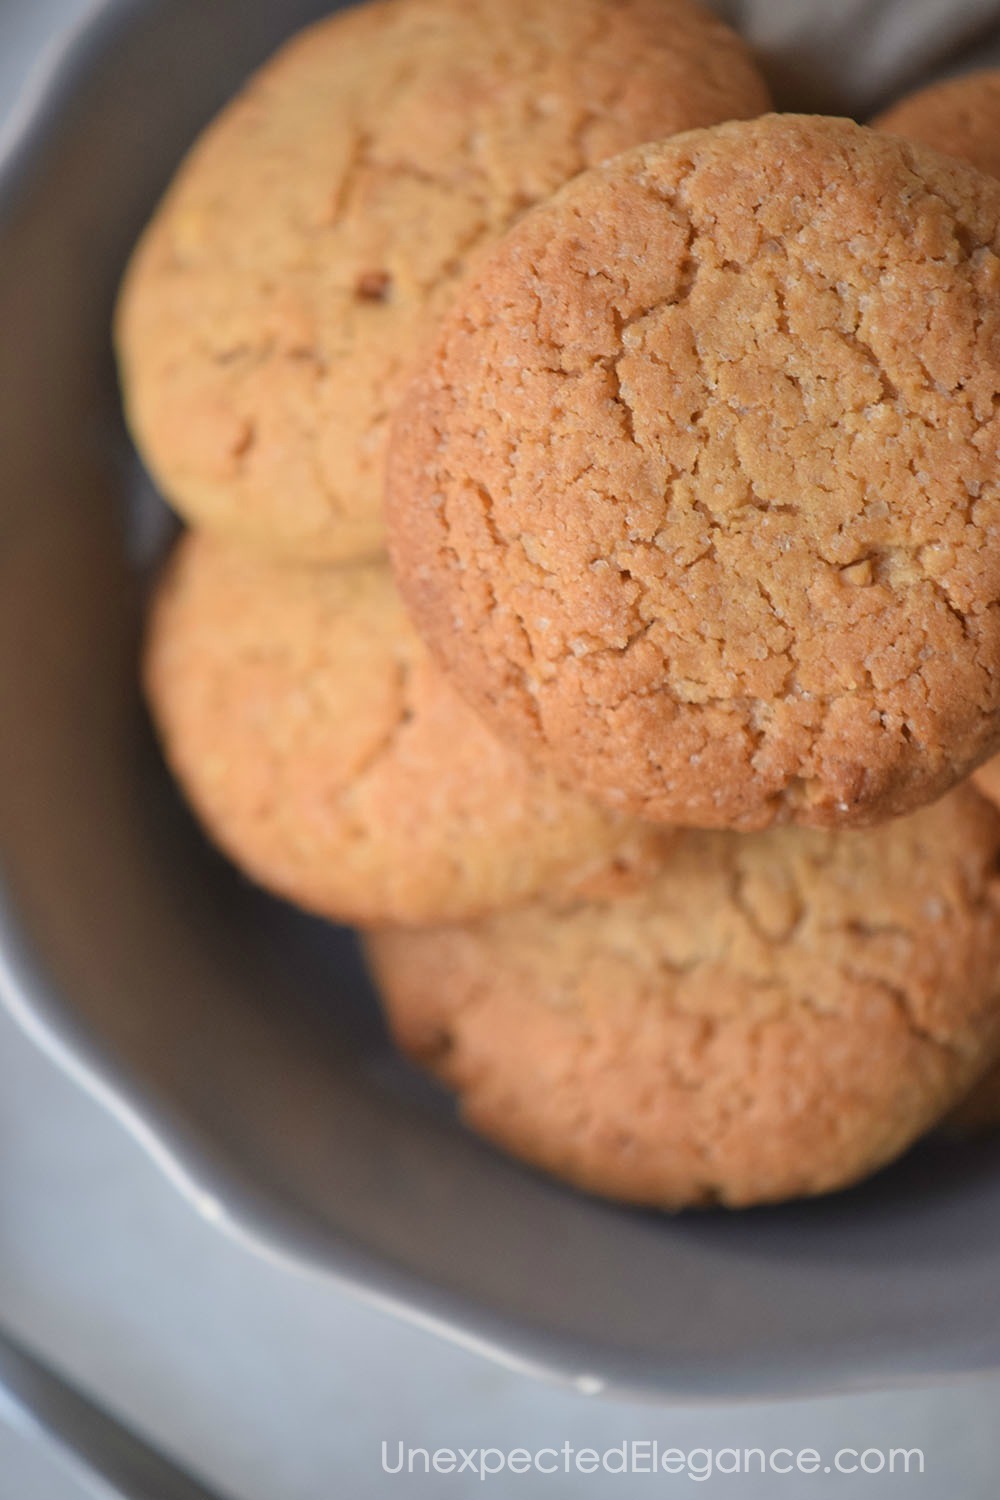 This recipe makes perfect SOFT peanut butter cookies!